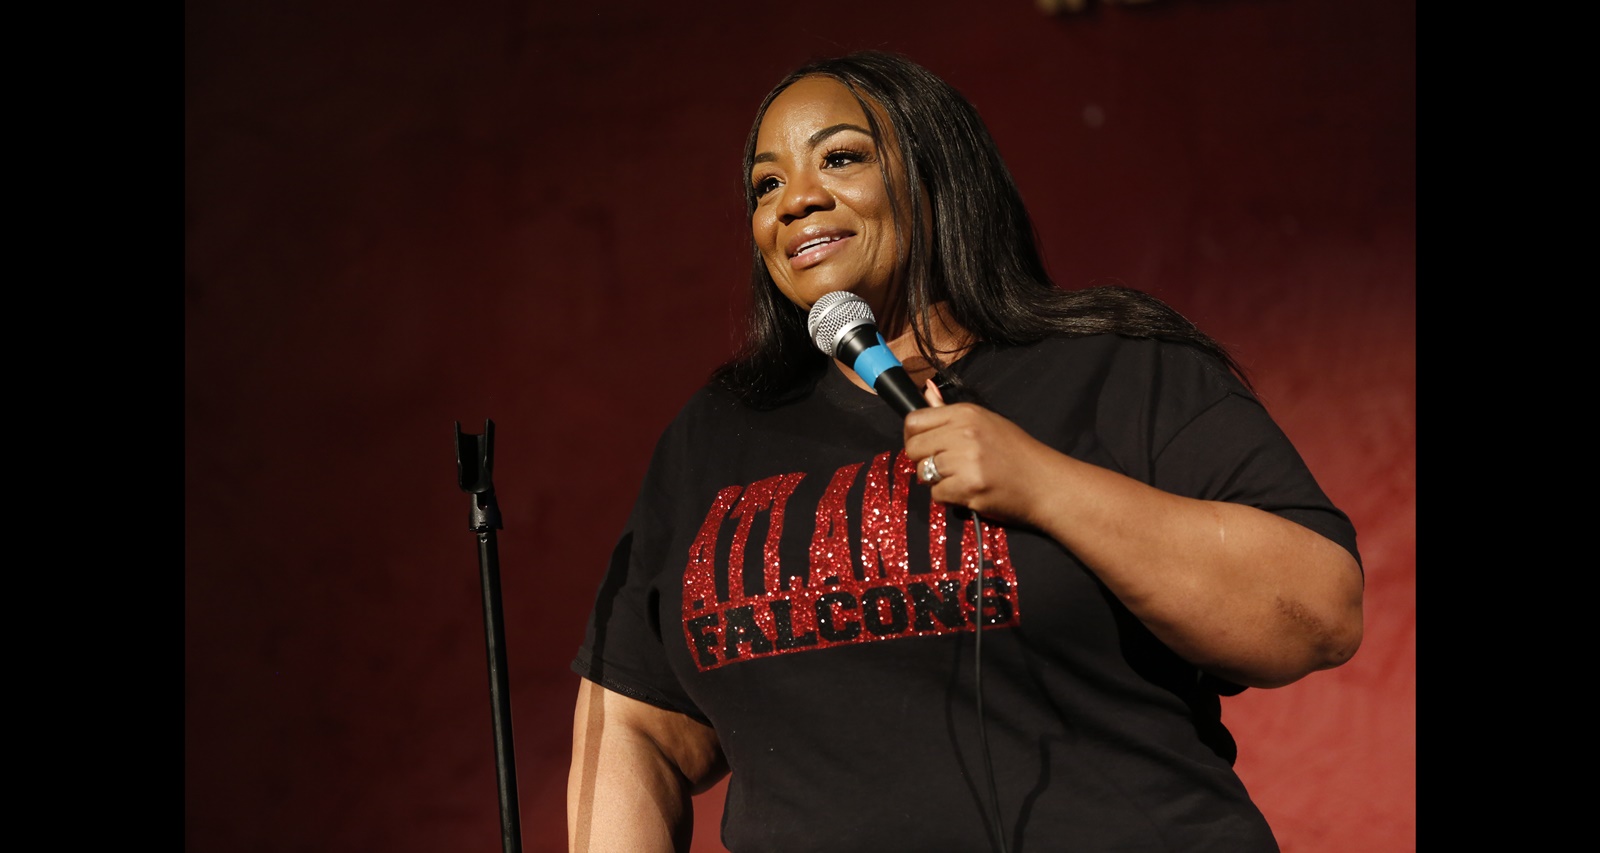 Ms. Pat Wiki, Age, Husband, Kids & Facts About the Comedian on Netflix’s “The Degenerates Season 2”